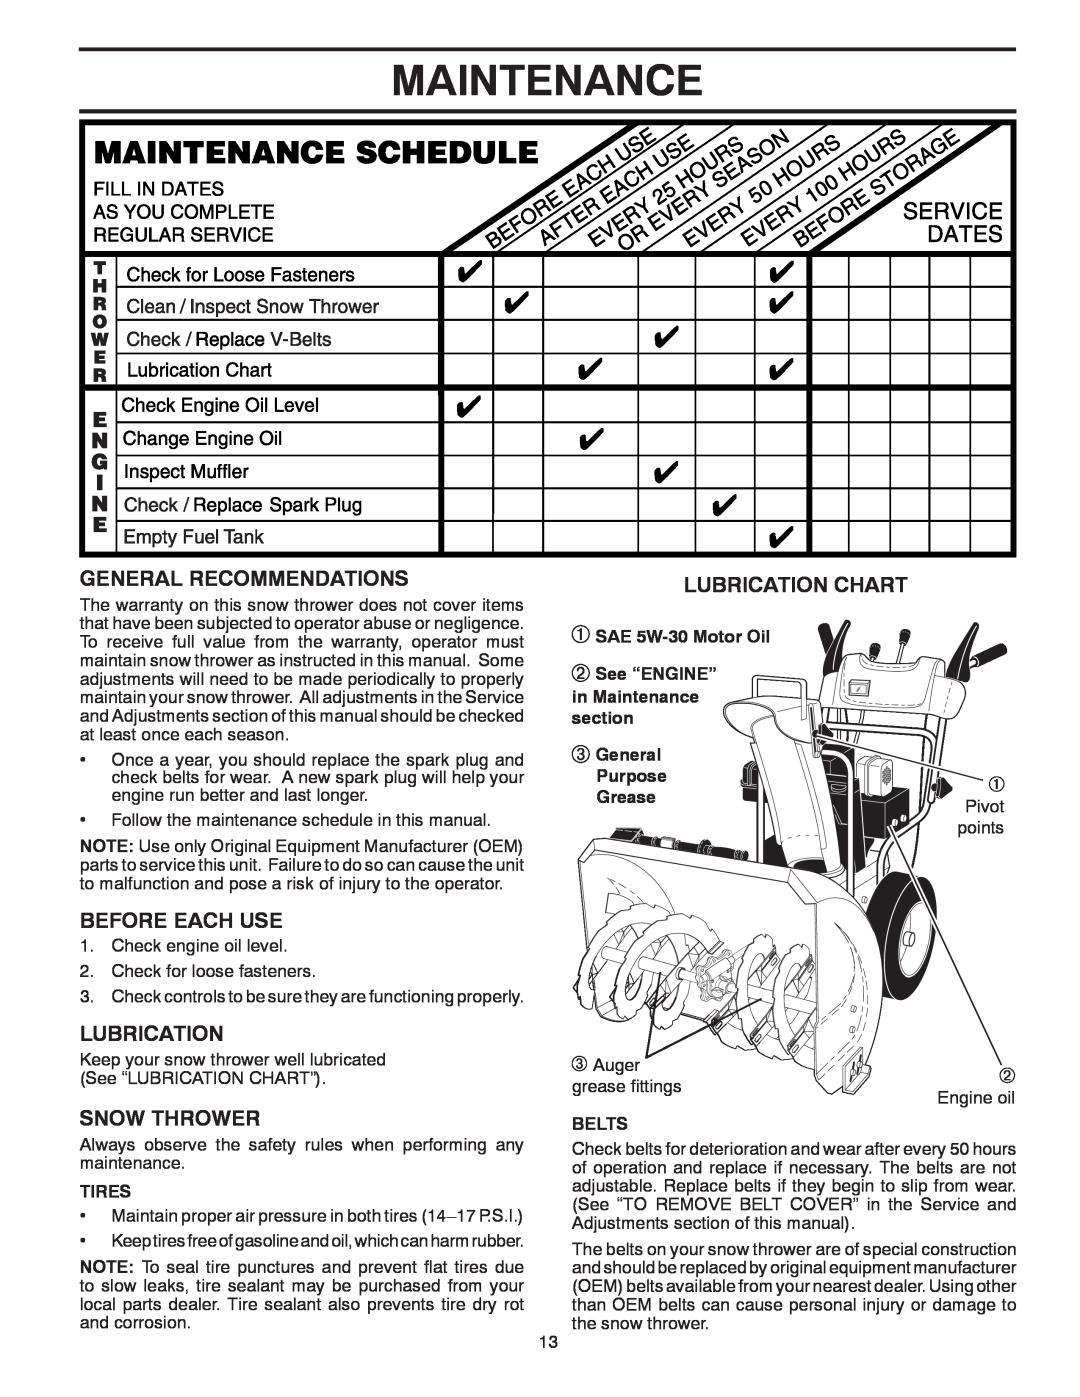 Poulan 96192003302 Maintenance, General Recommendations, Before Each Use, Snow Thrower, Lubrication Chart, Tires 